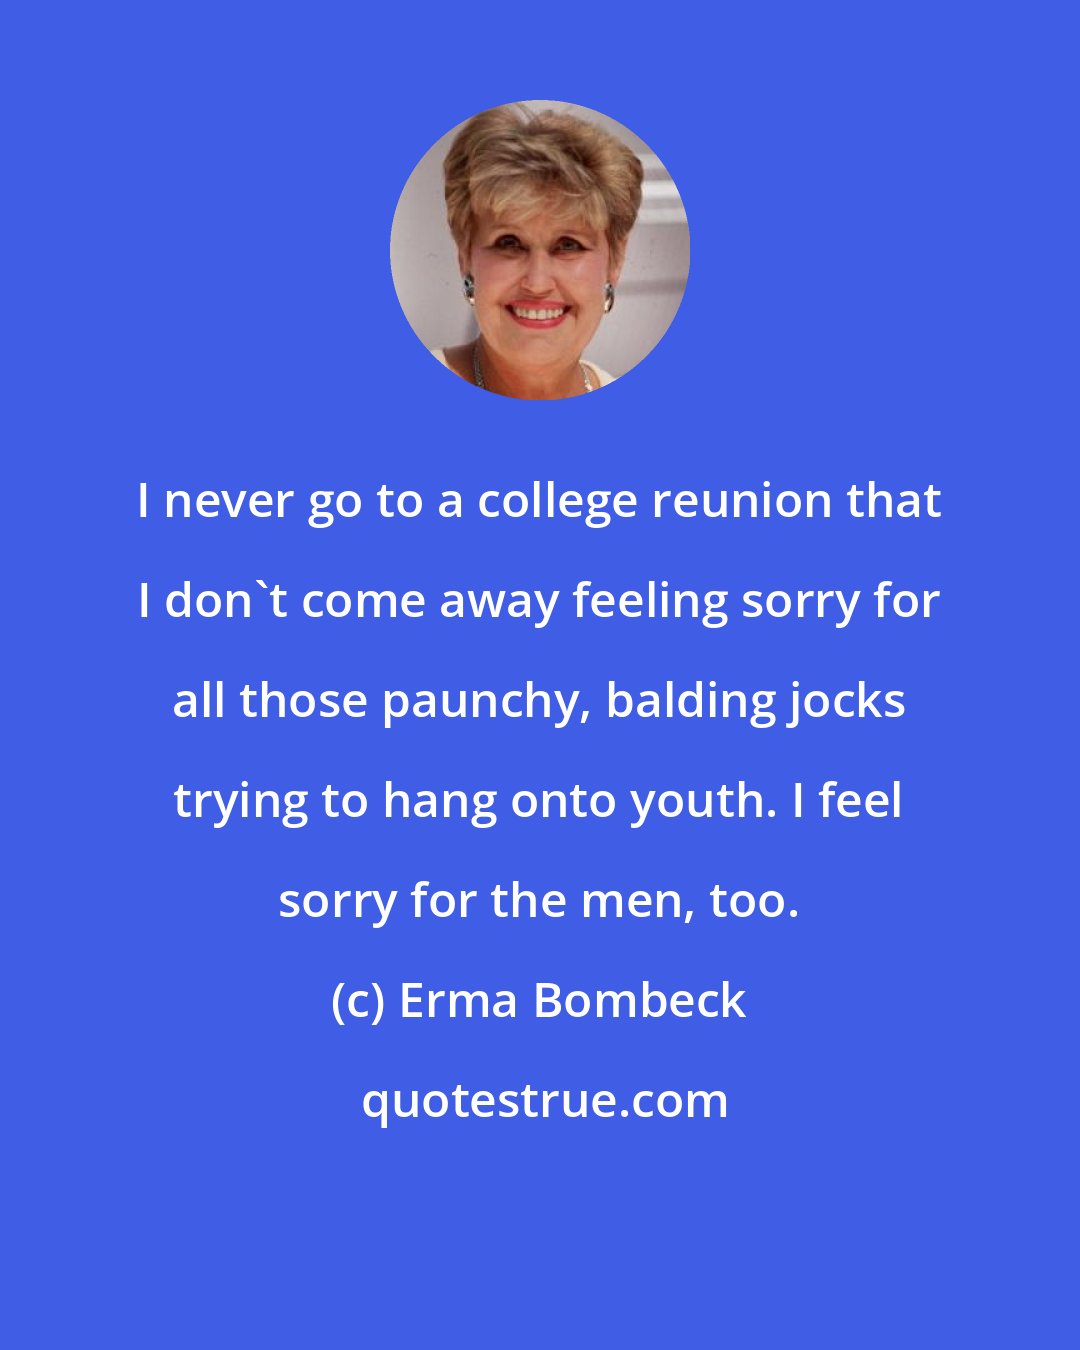 Erma Bombeck: I never go to a college reunion that I don't come away feeling sorry for all those paunchy, balding jocks trying to hang onto youth. I feel sorry for the men, too.